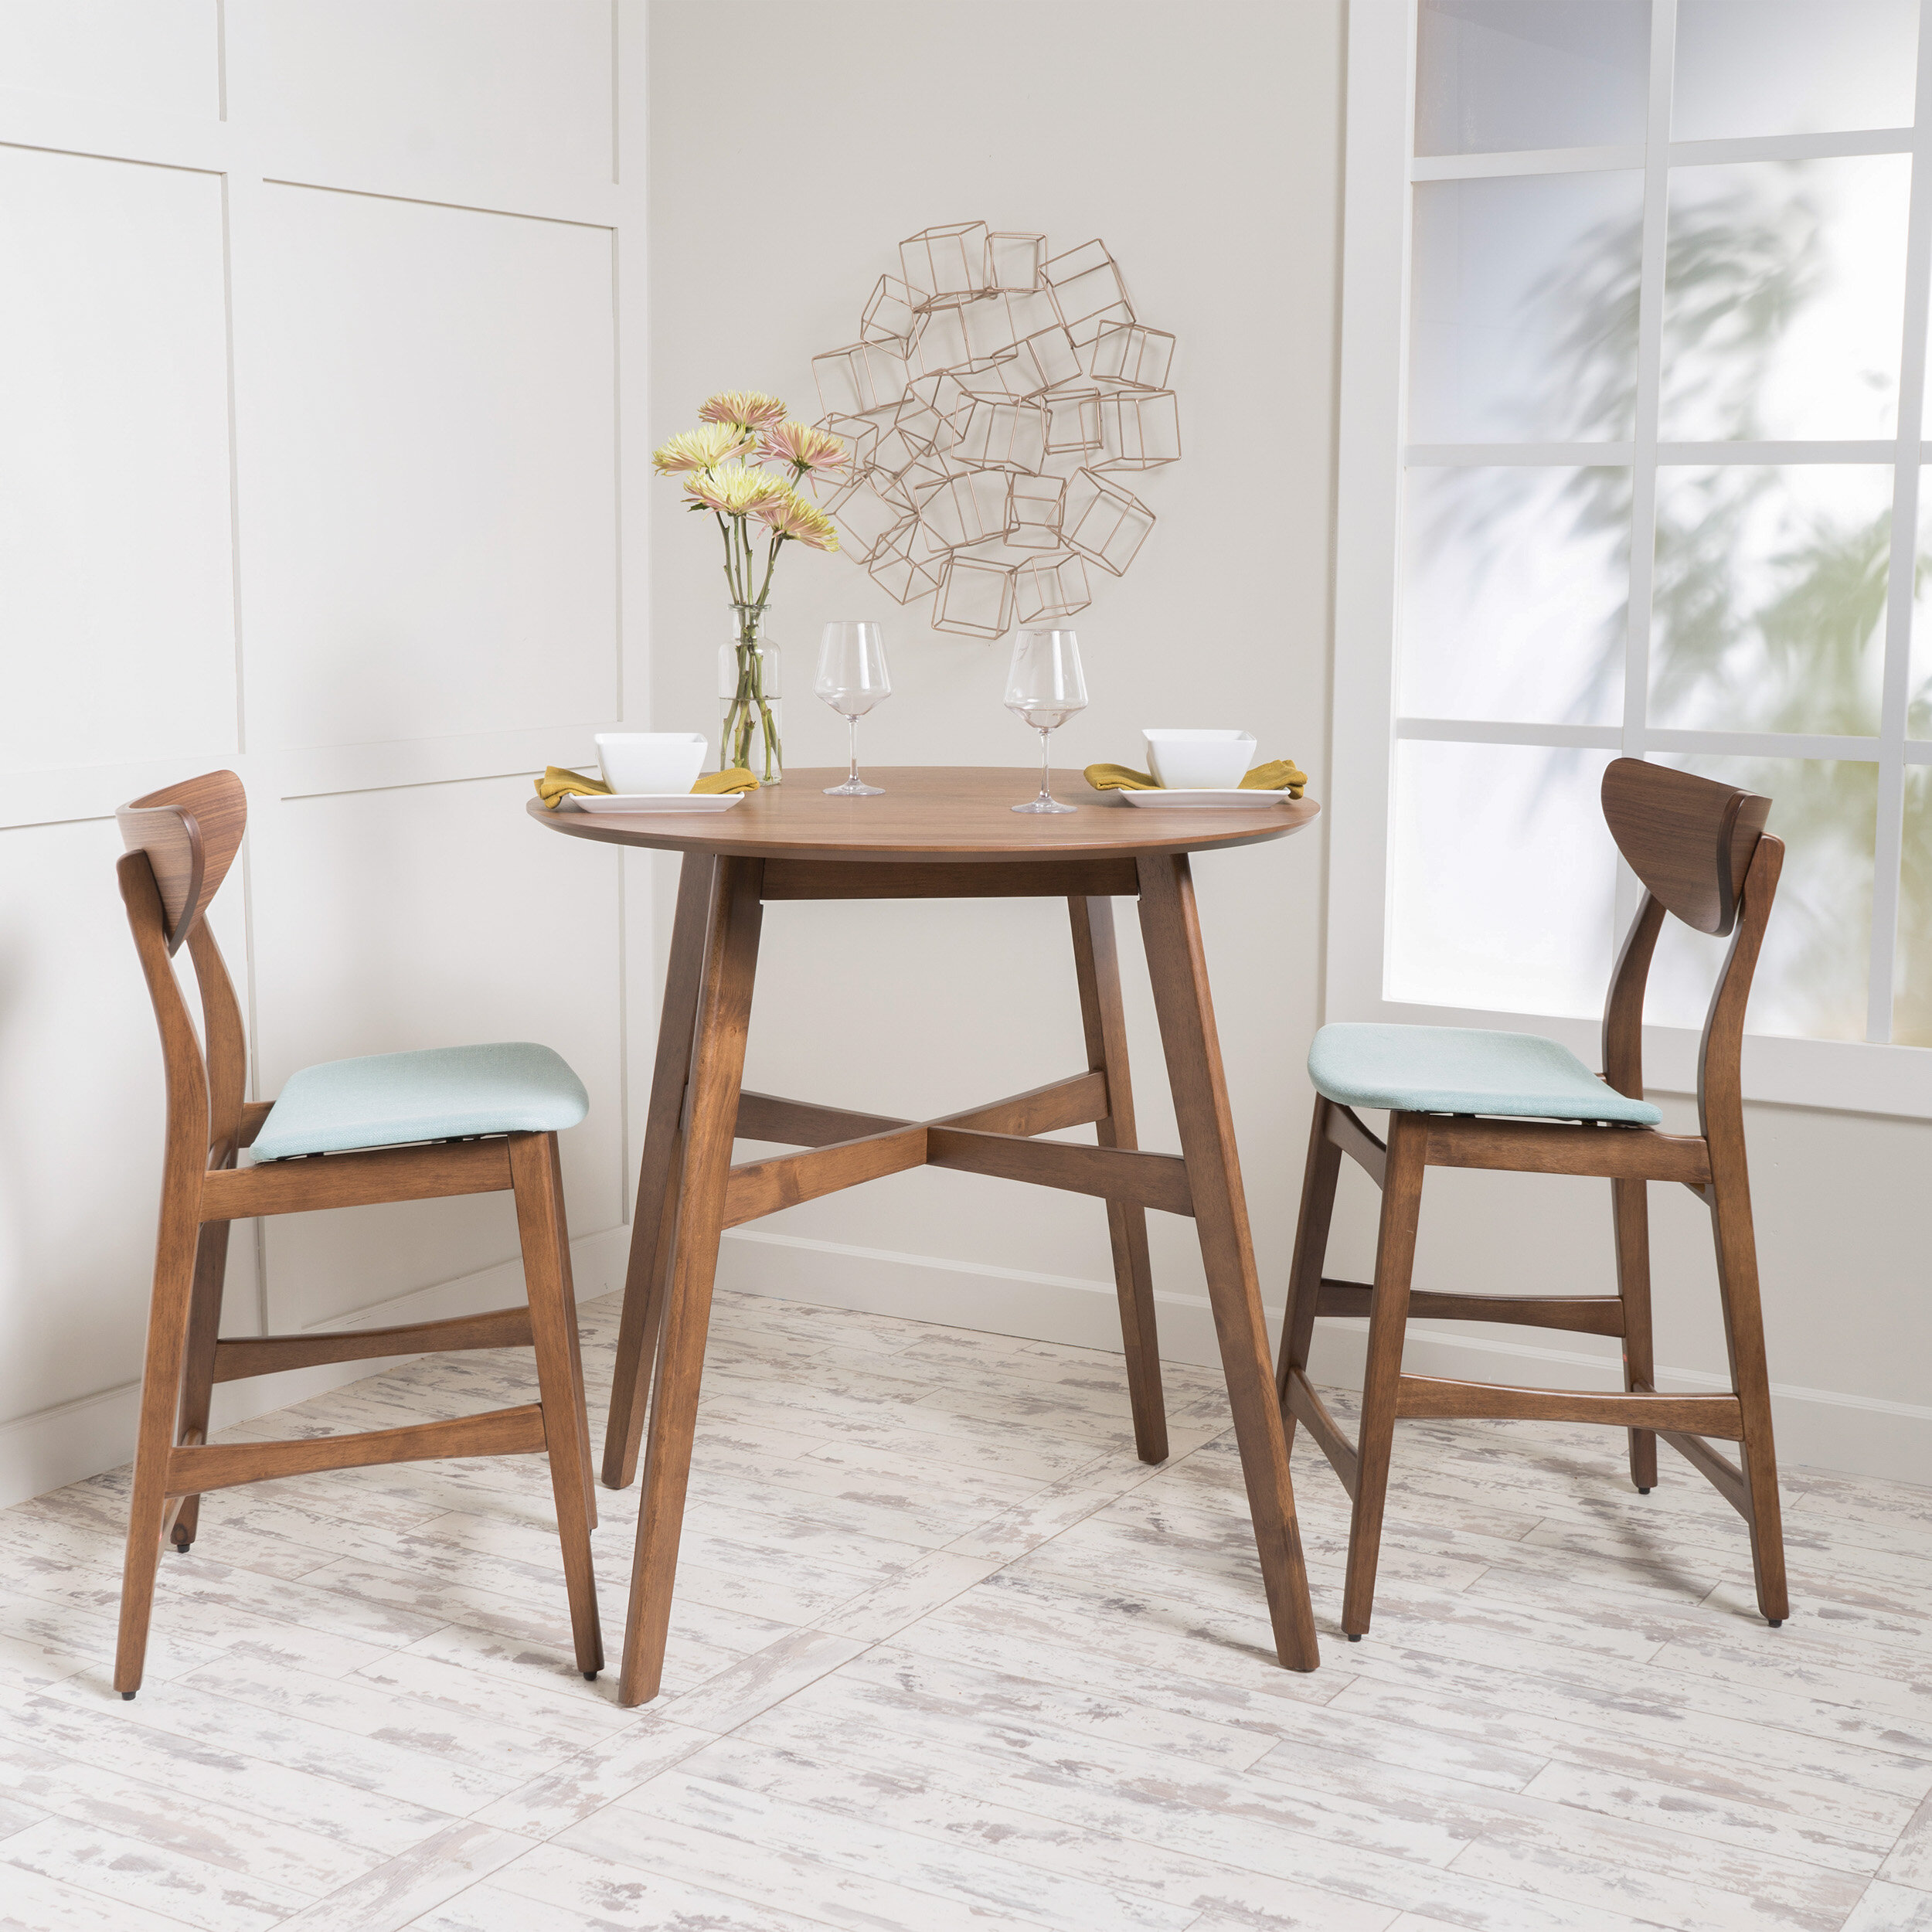 3 Piece Pub Table Set Bar Stool Counter Height Bistro Kitchen Dining Chair Round 